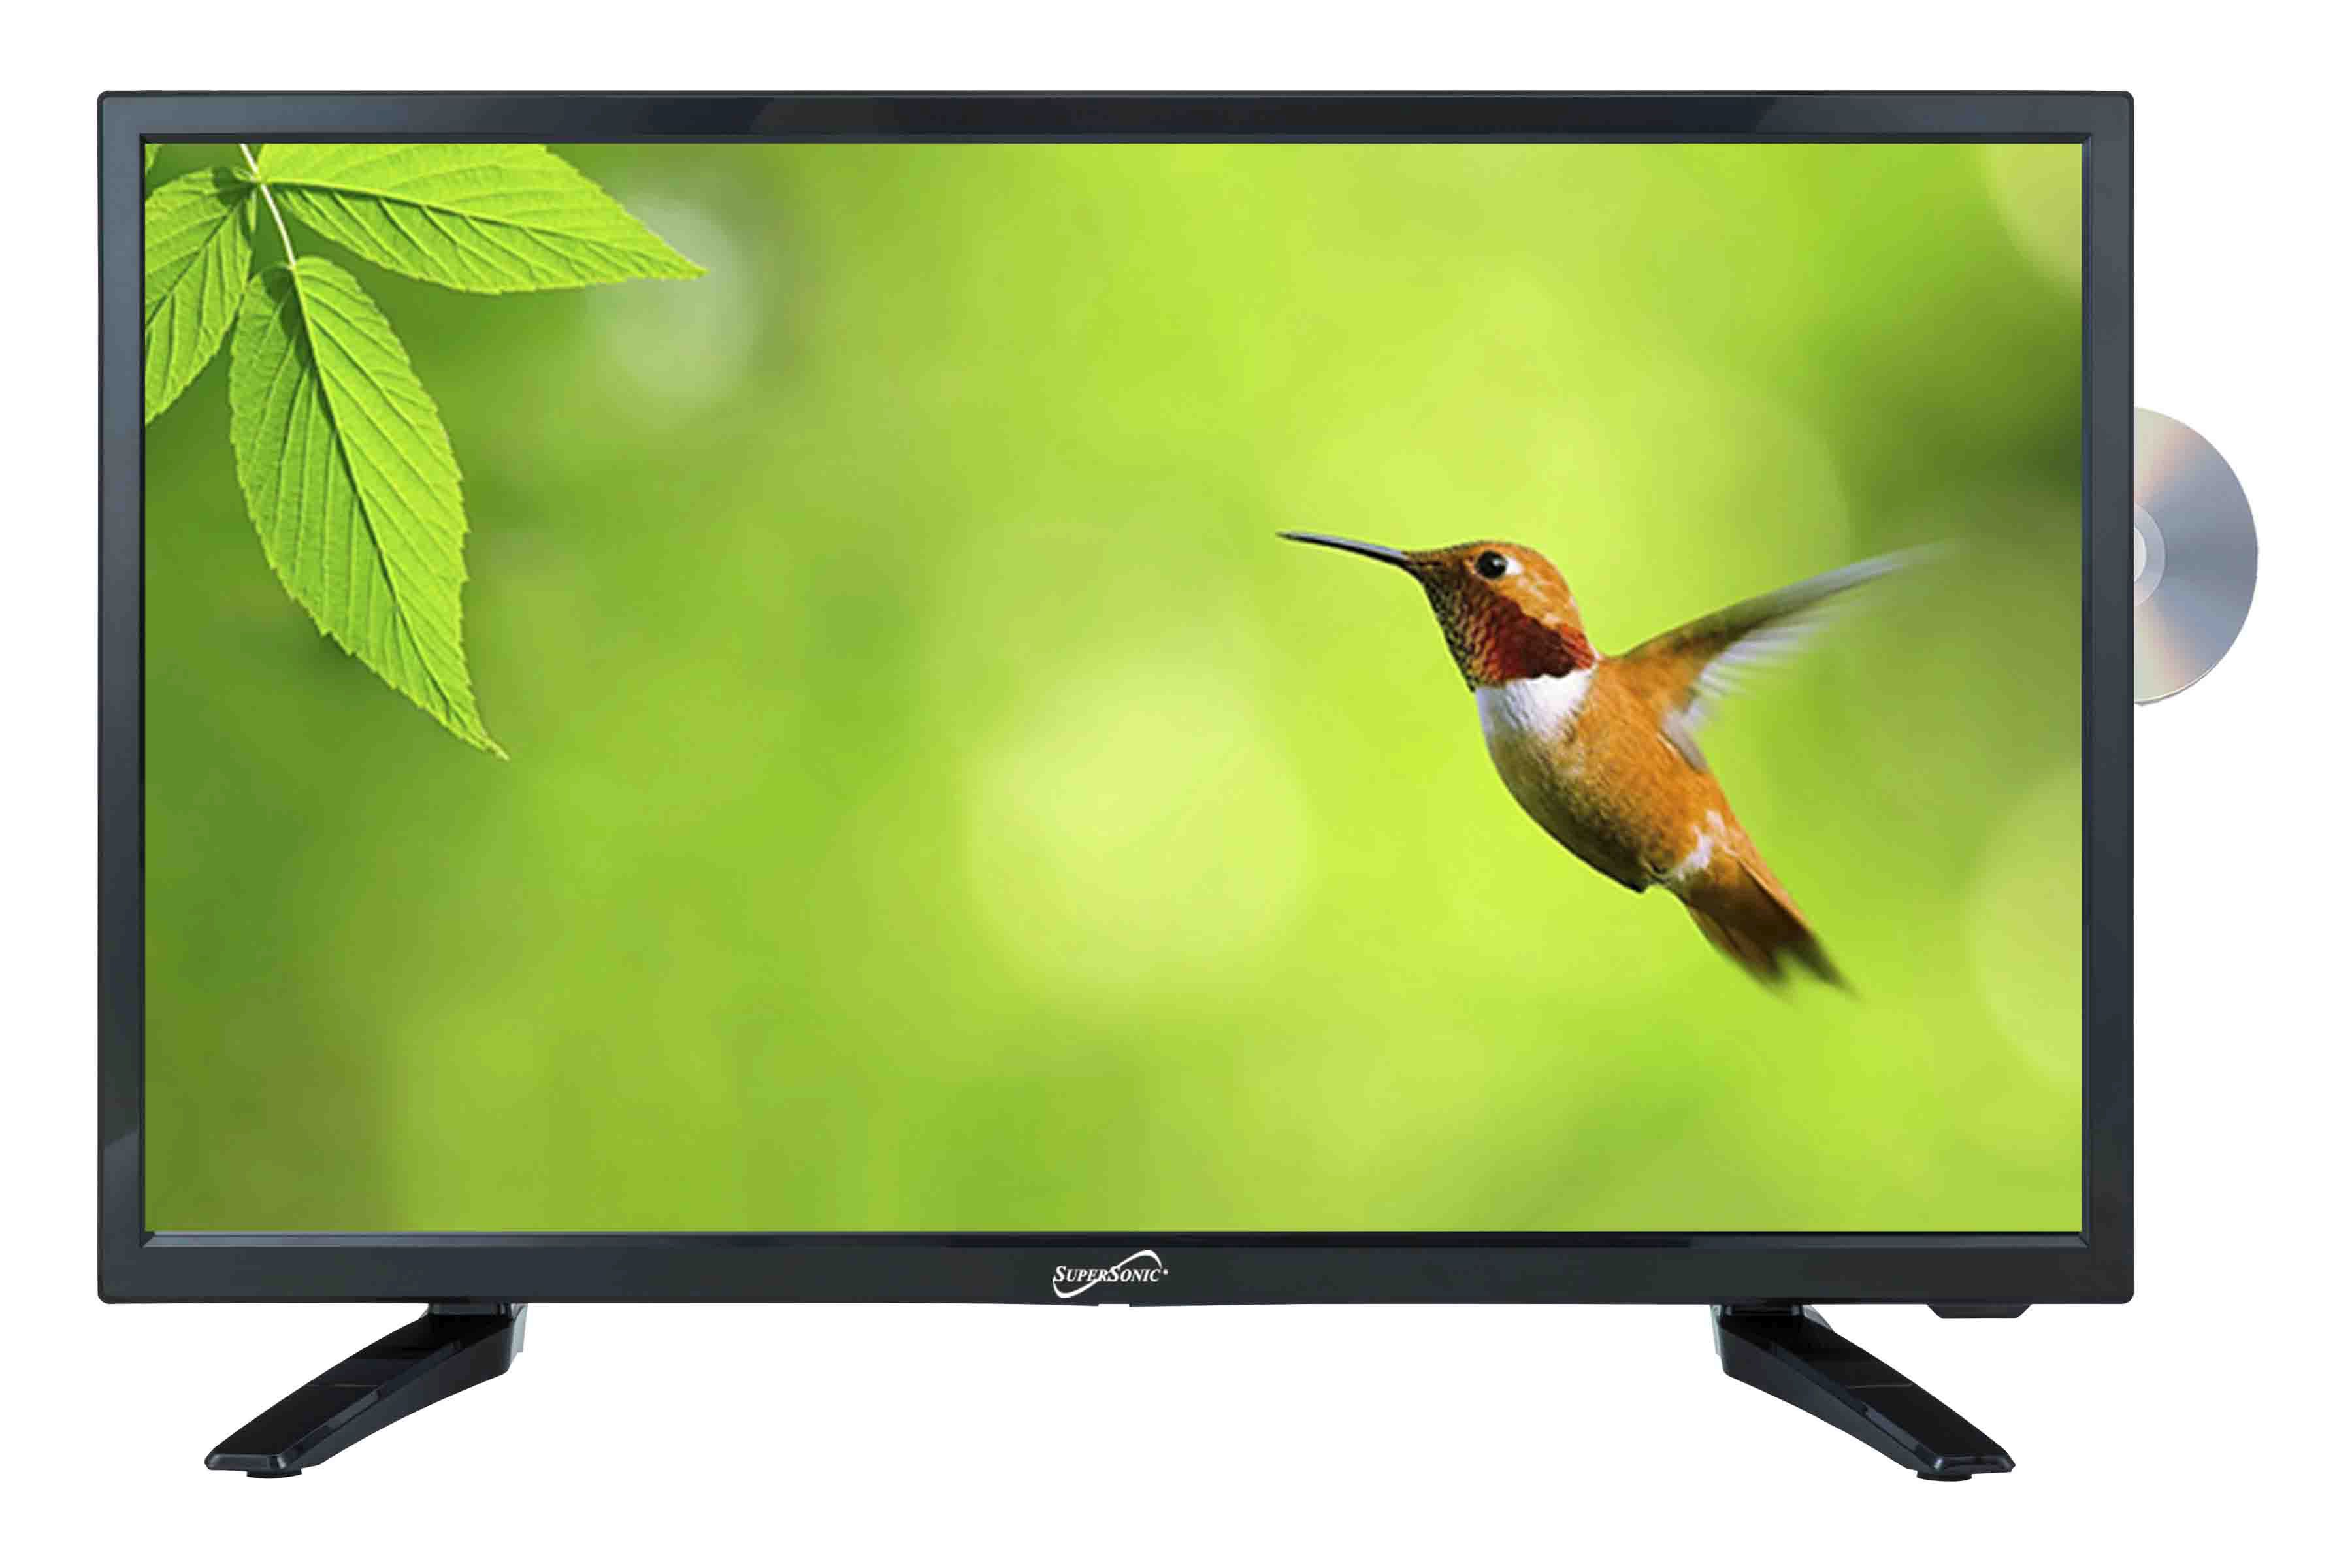 Picture of Supersonic SC-1912 19 in. Widescreen LED HDTV with Built-in DVD Player